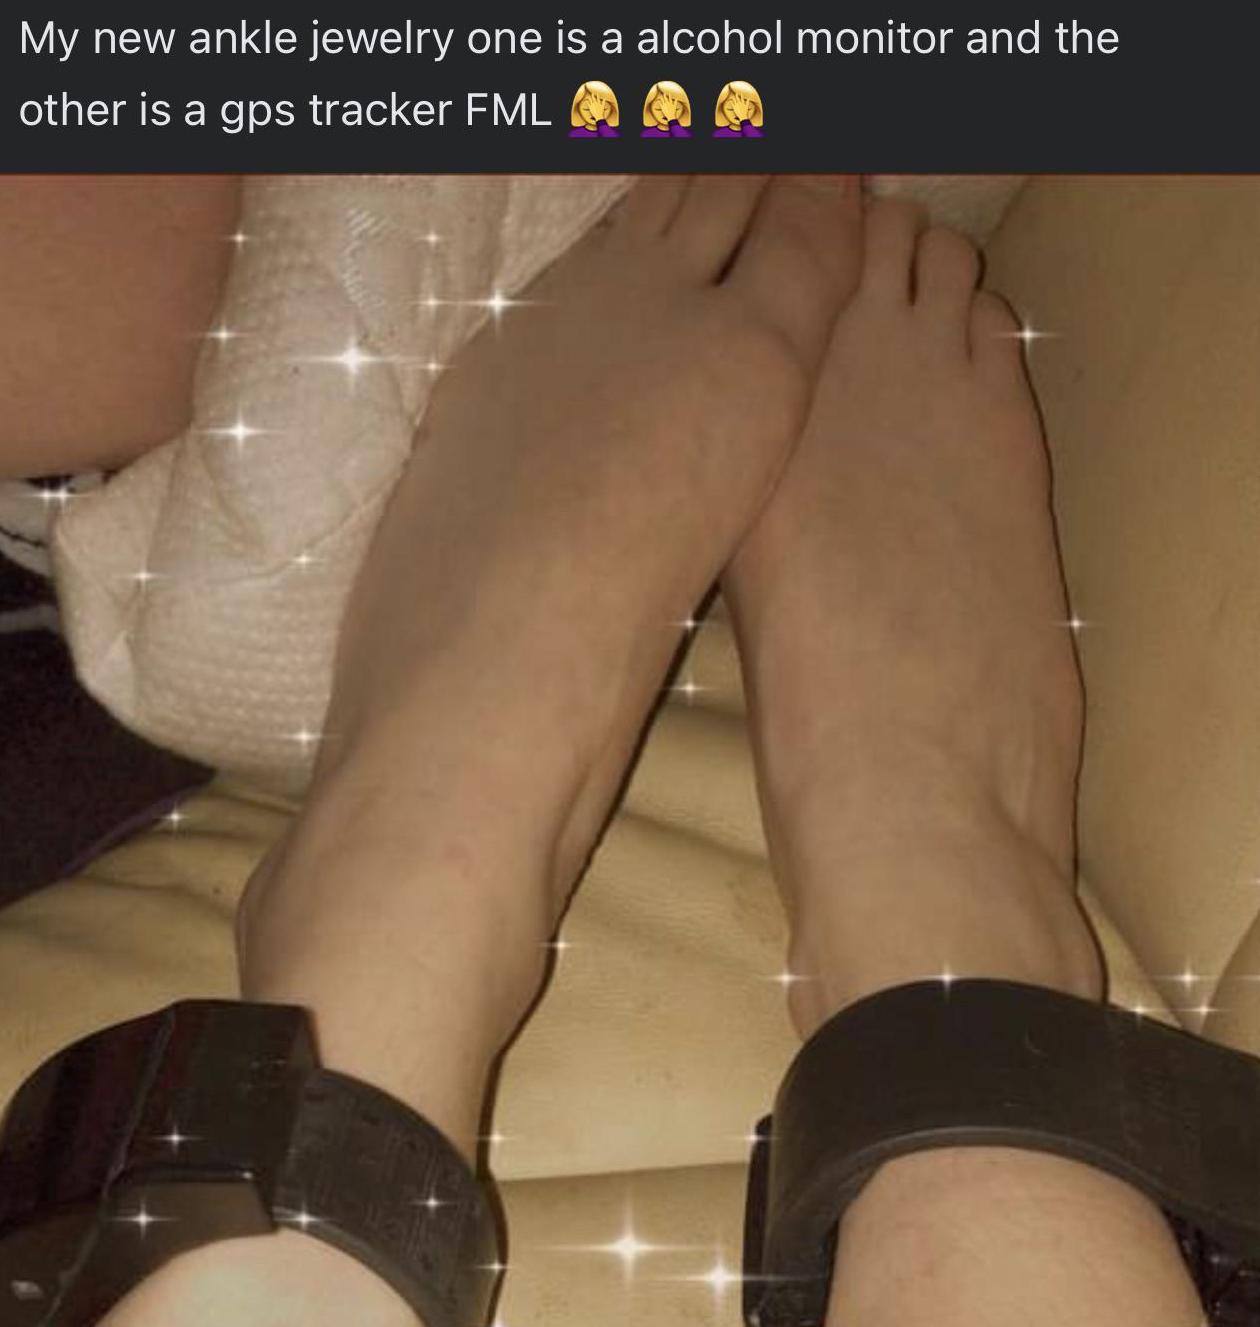 trashy photos - human leg - My new ankle jewelry one is a alcohol monitor and the other is a gps tracker Fml